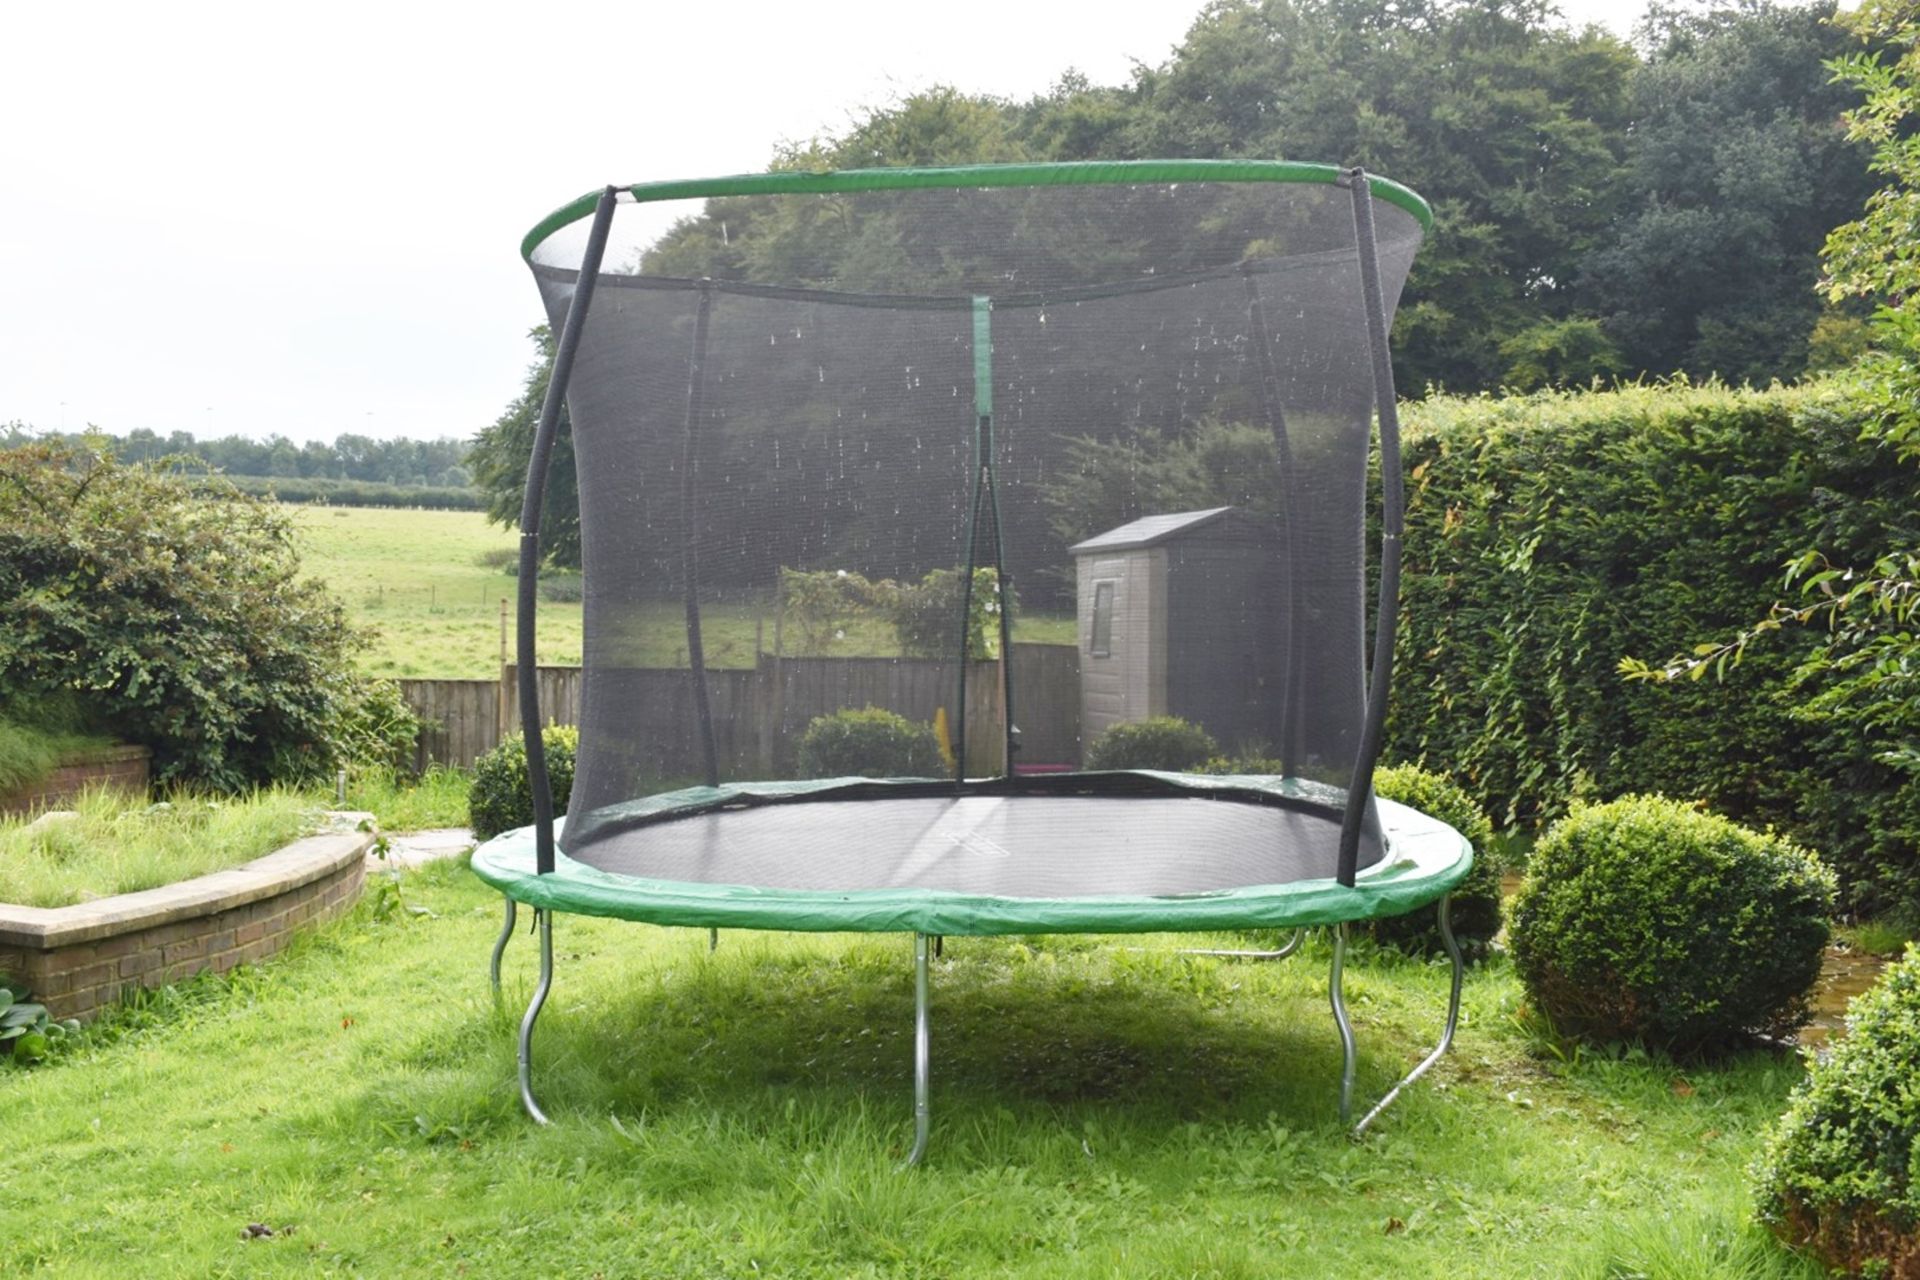 1 x Outdoor Sports Power 8ft Trampoline With Safety Net - CL546 - Location: Hale, Cheshire - NO - Image 2 of 3